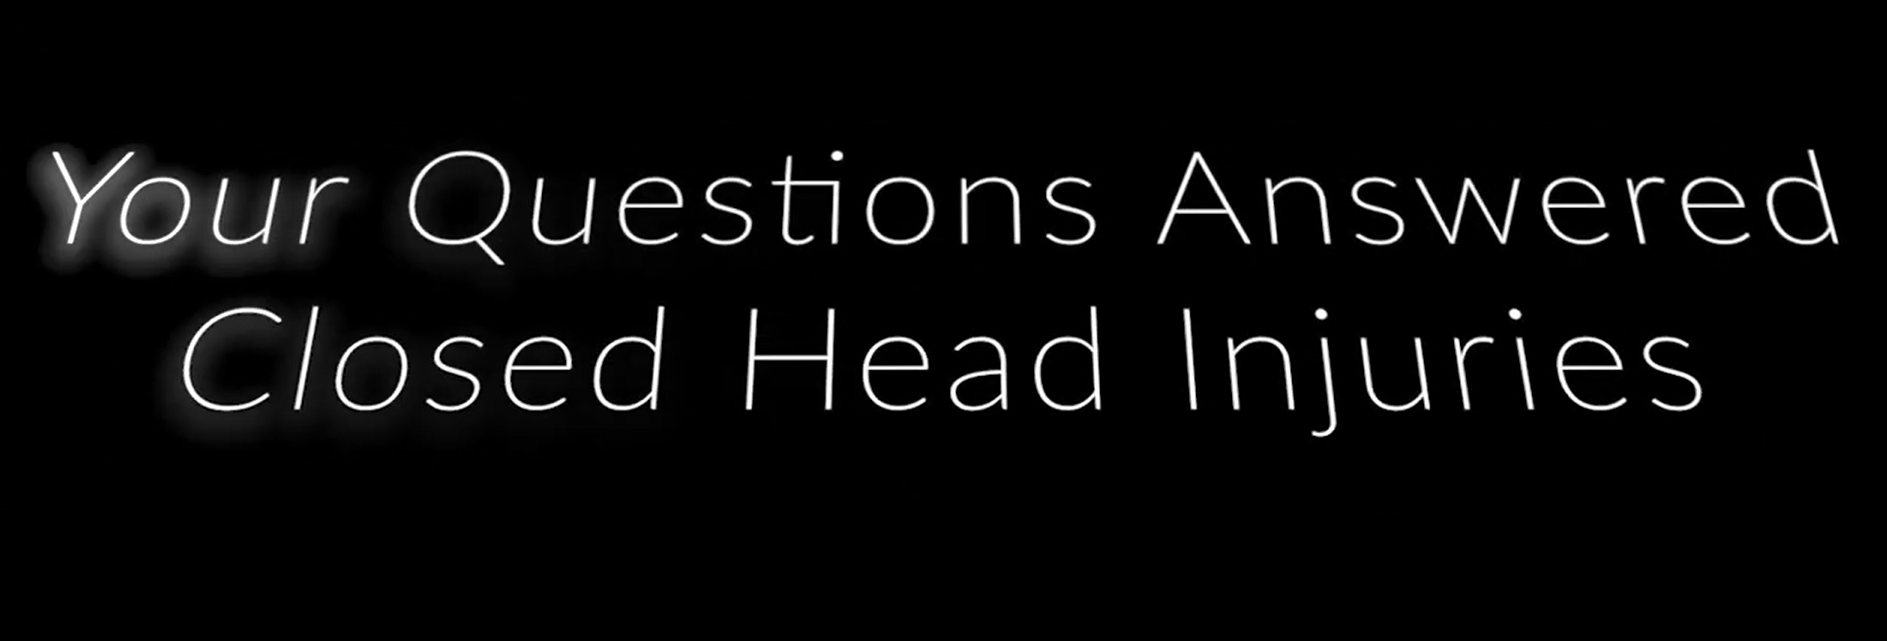 White text on a black background about a trauma care seminar on closed head injuries where your questions can be answered.